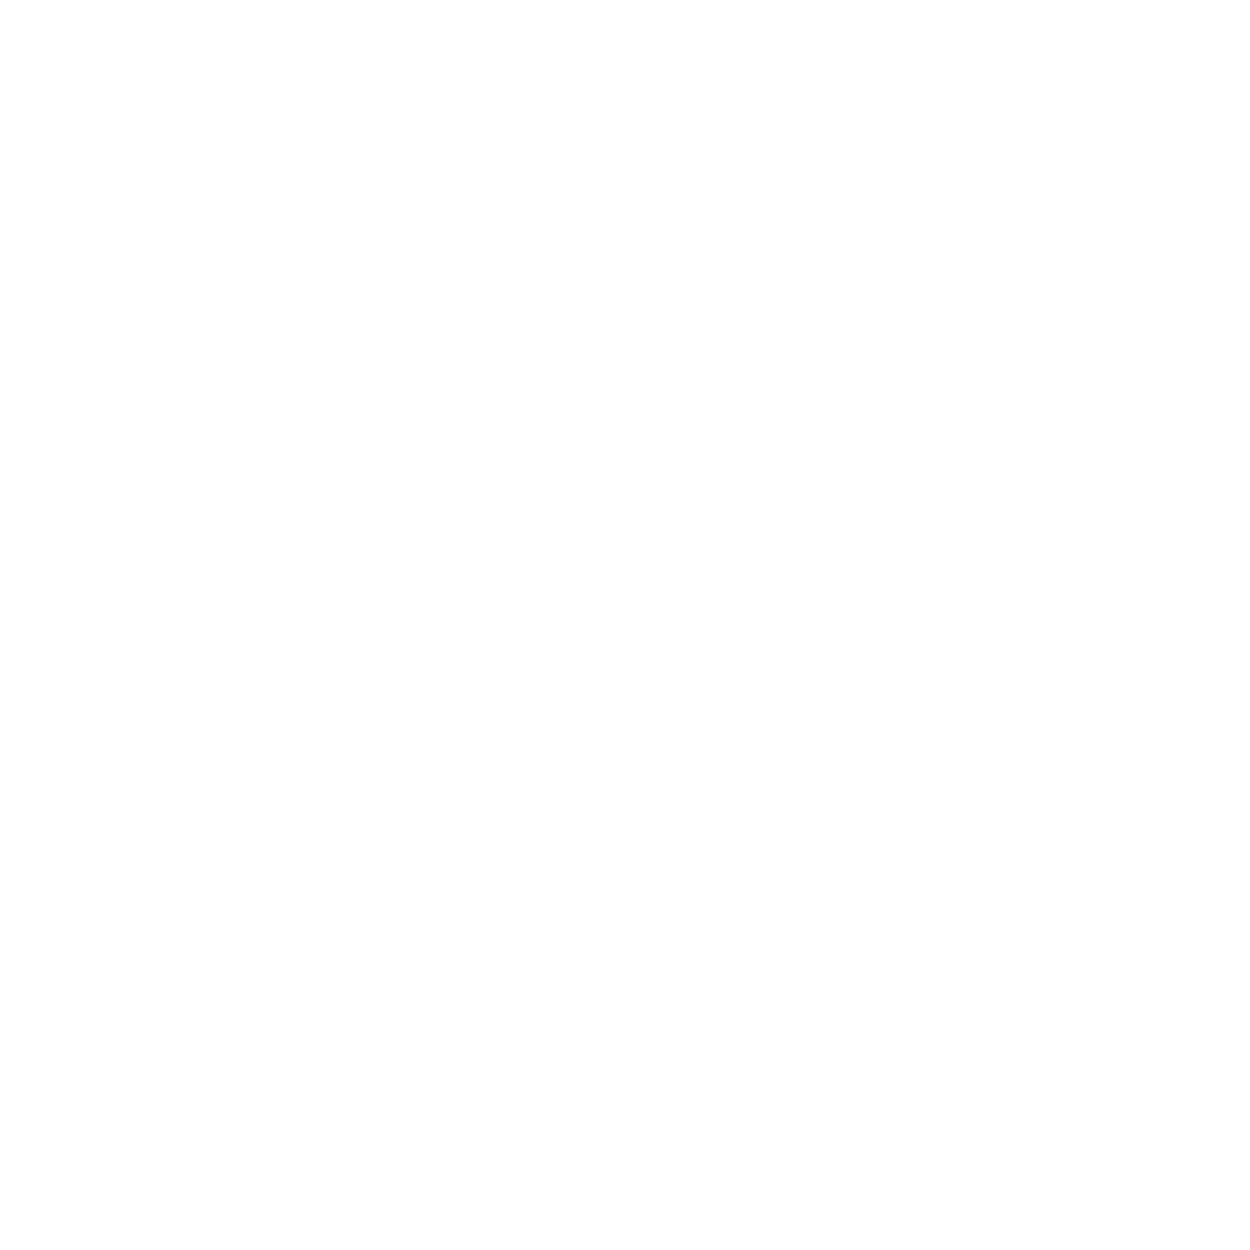 Tree surgeon in Greenwich and London